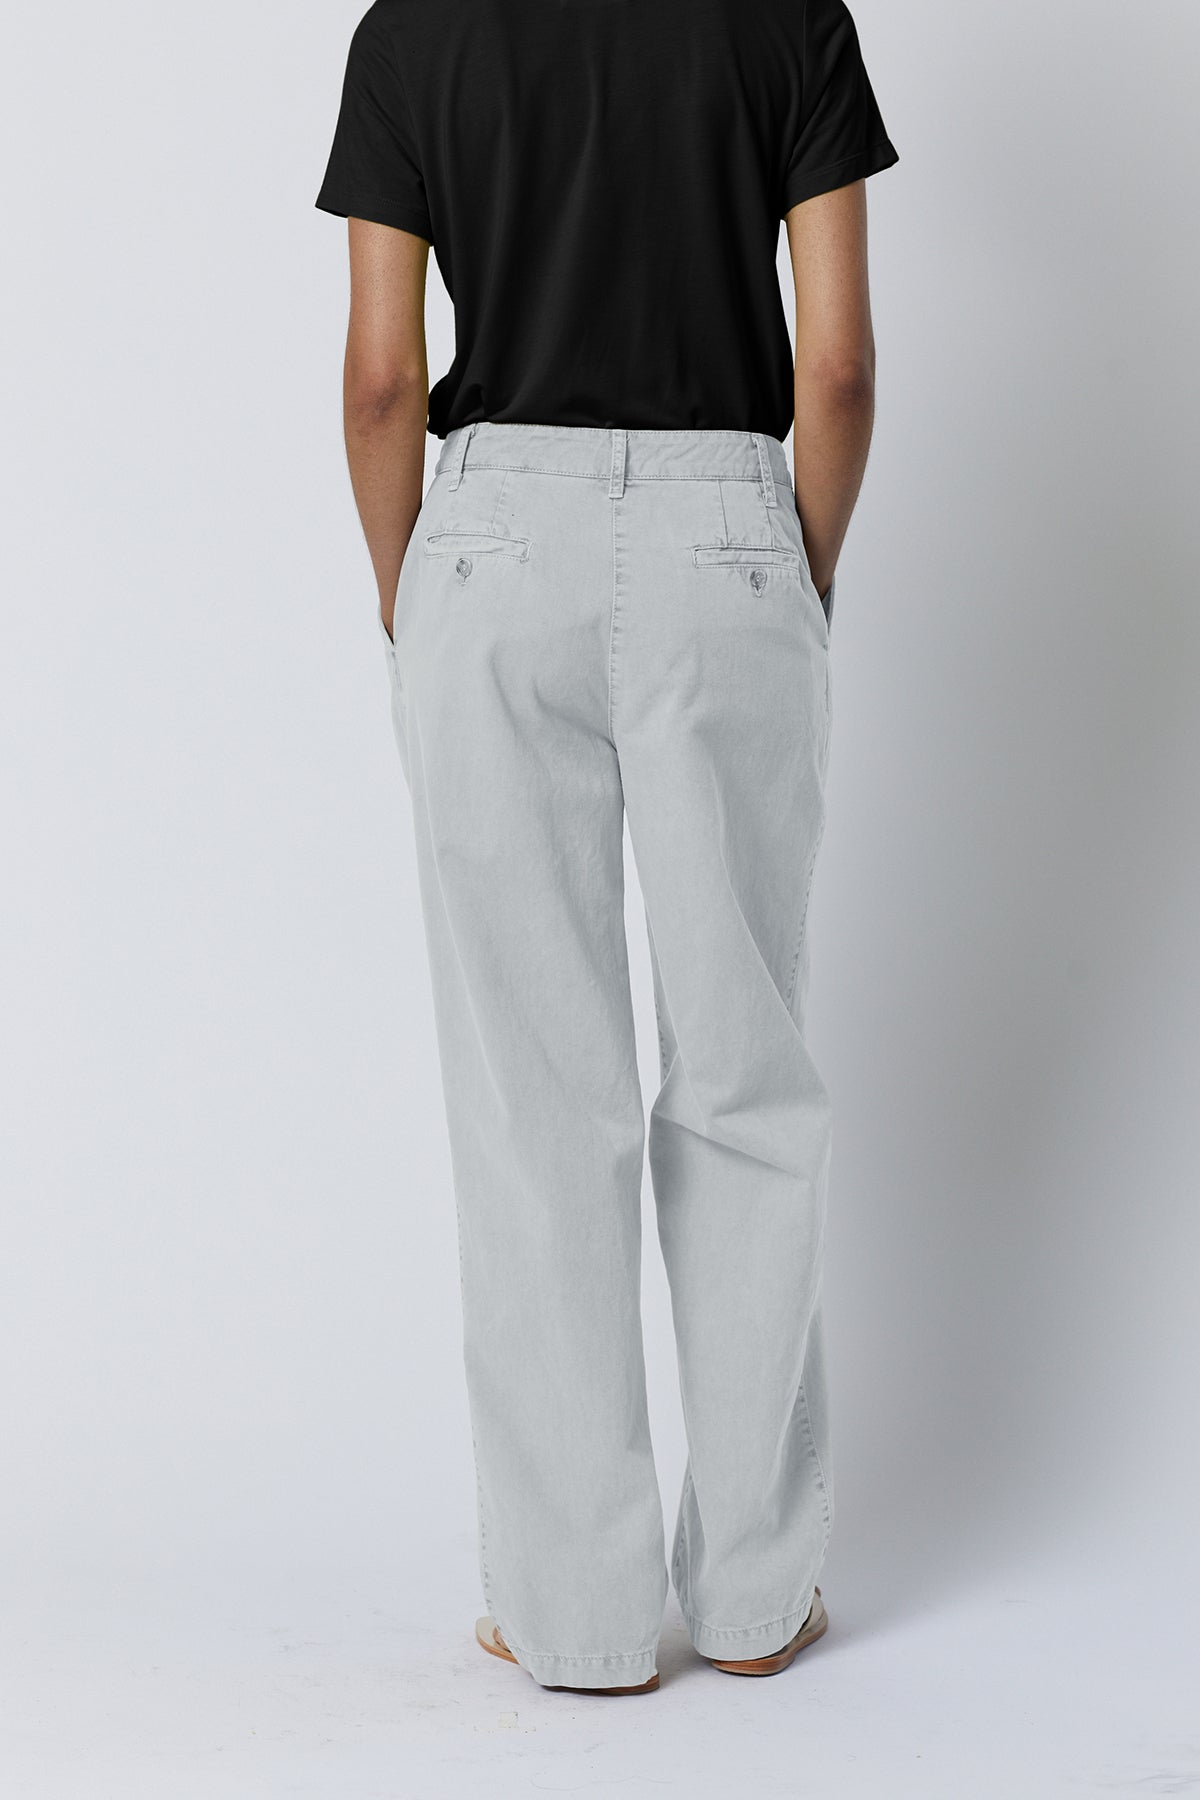 Temescal Pant in candle back-26007137288385